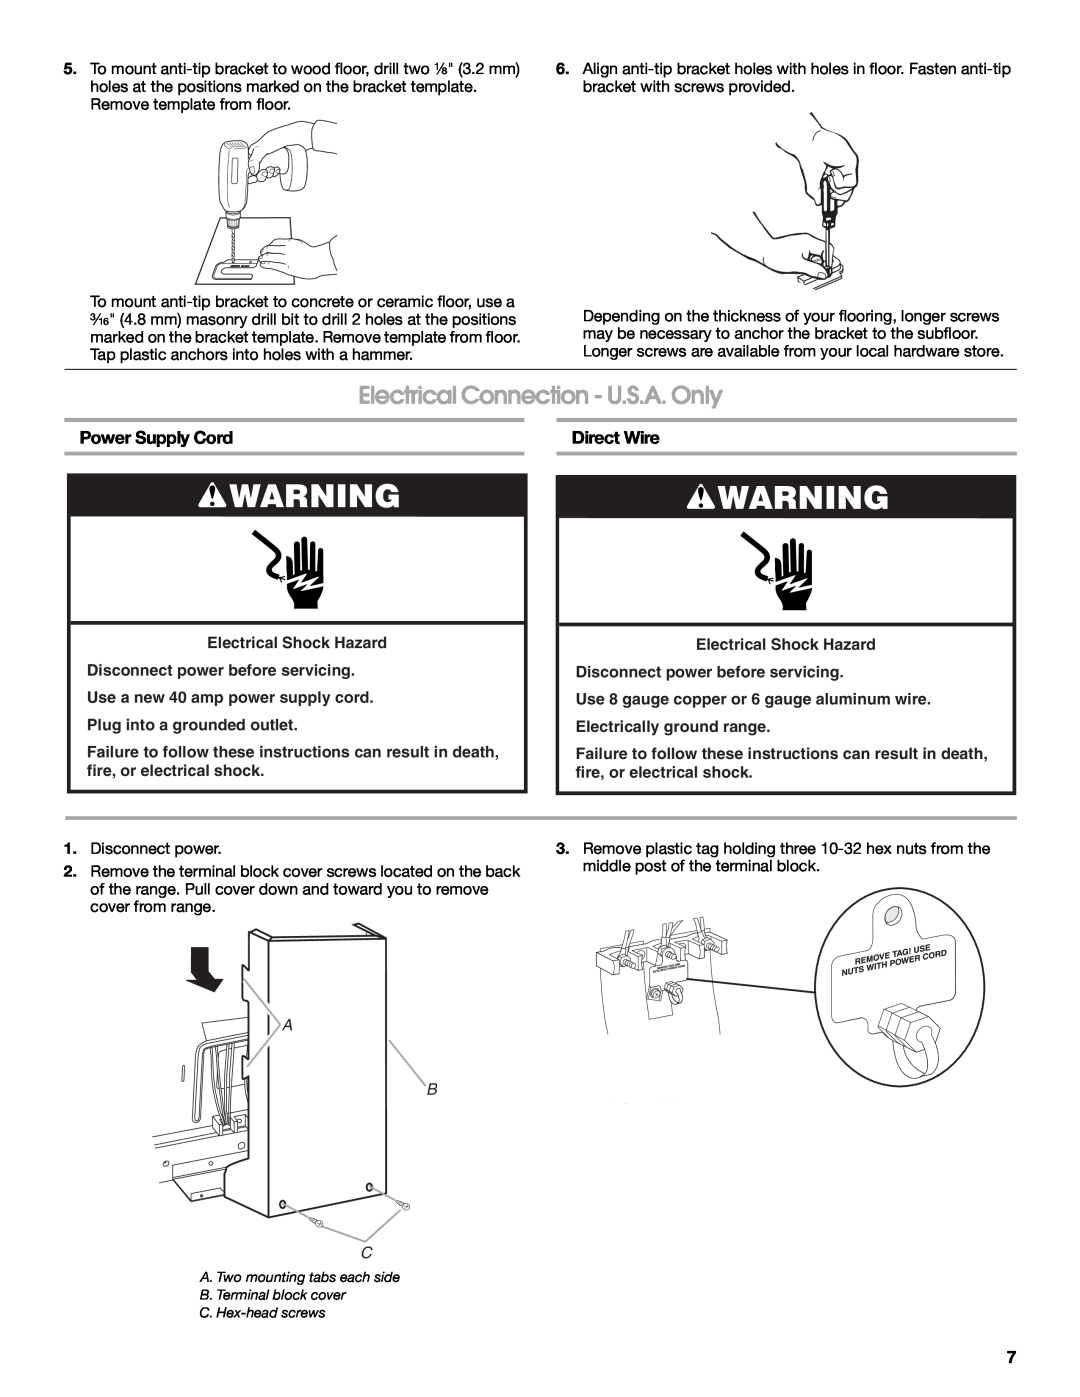 Maytag W10252706B installation instructions Electrical Connection - U.S.A. Only, Power Supply Cord, Direct Wire, A B C 